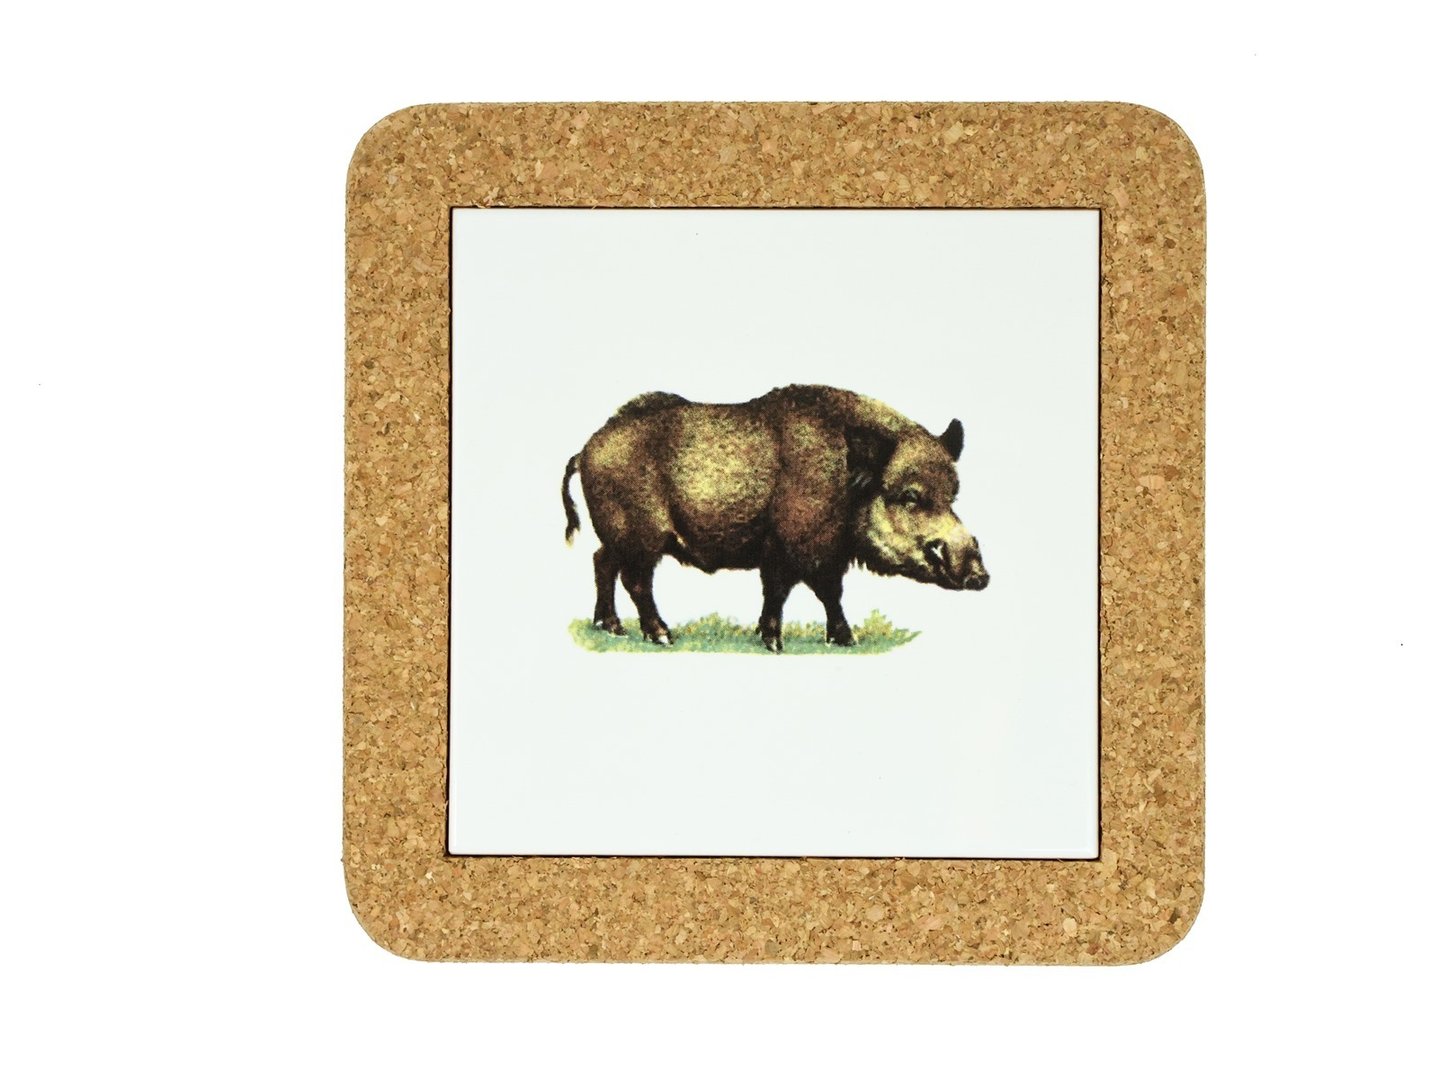 7902 W S Coaster With Tile Animal World